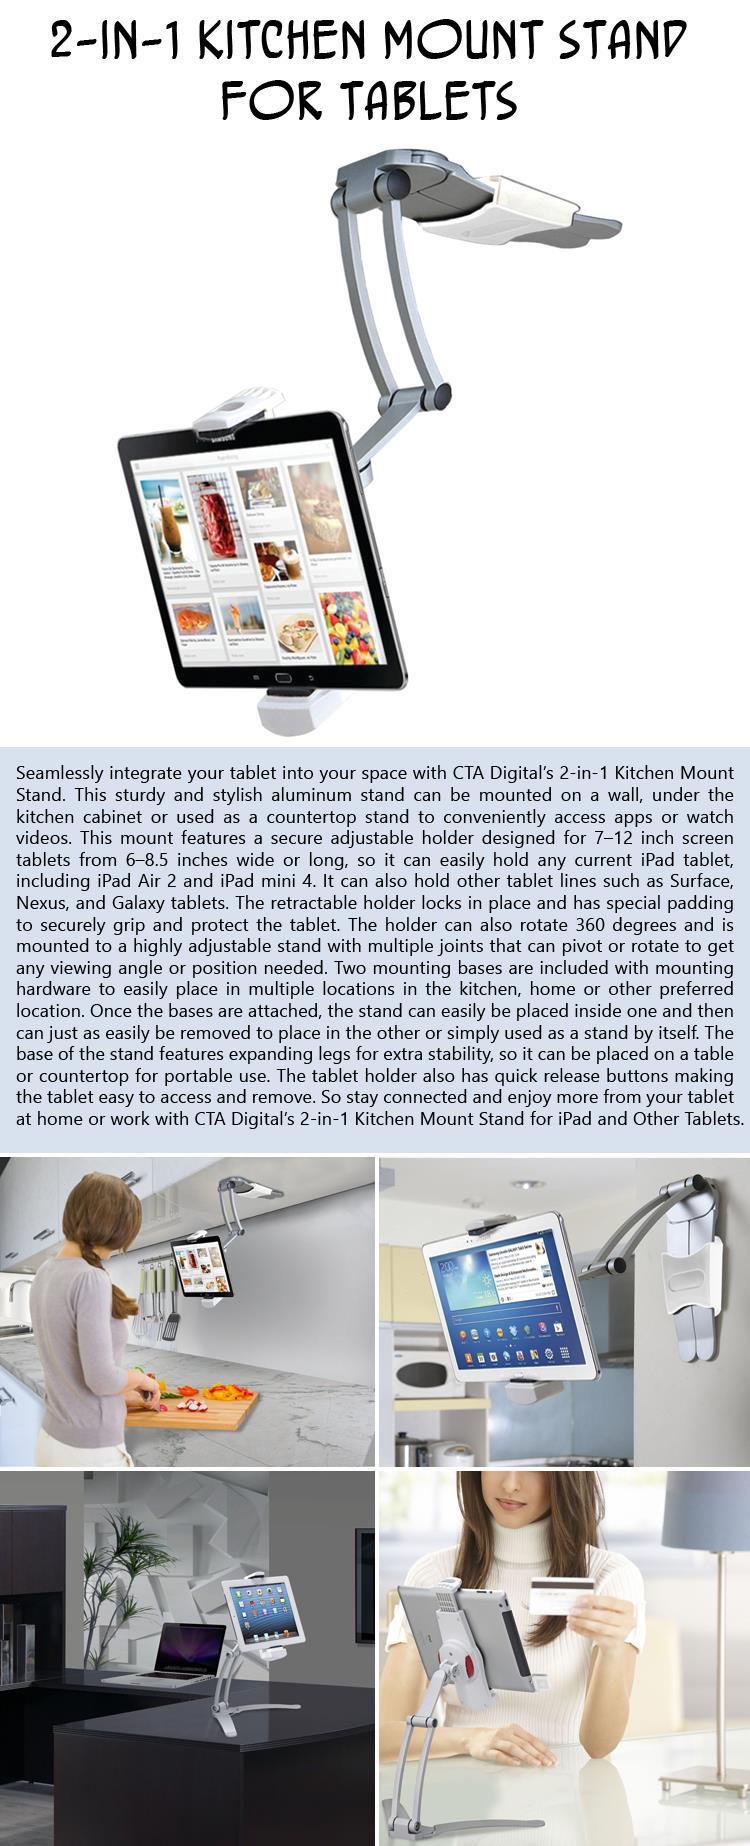 http://www.dumpaday.com/wp-content/uploads/2020/01/2-in-1-Kitchen-Mount-Stand-for-Tablets.jpg